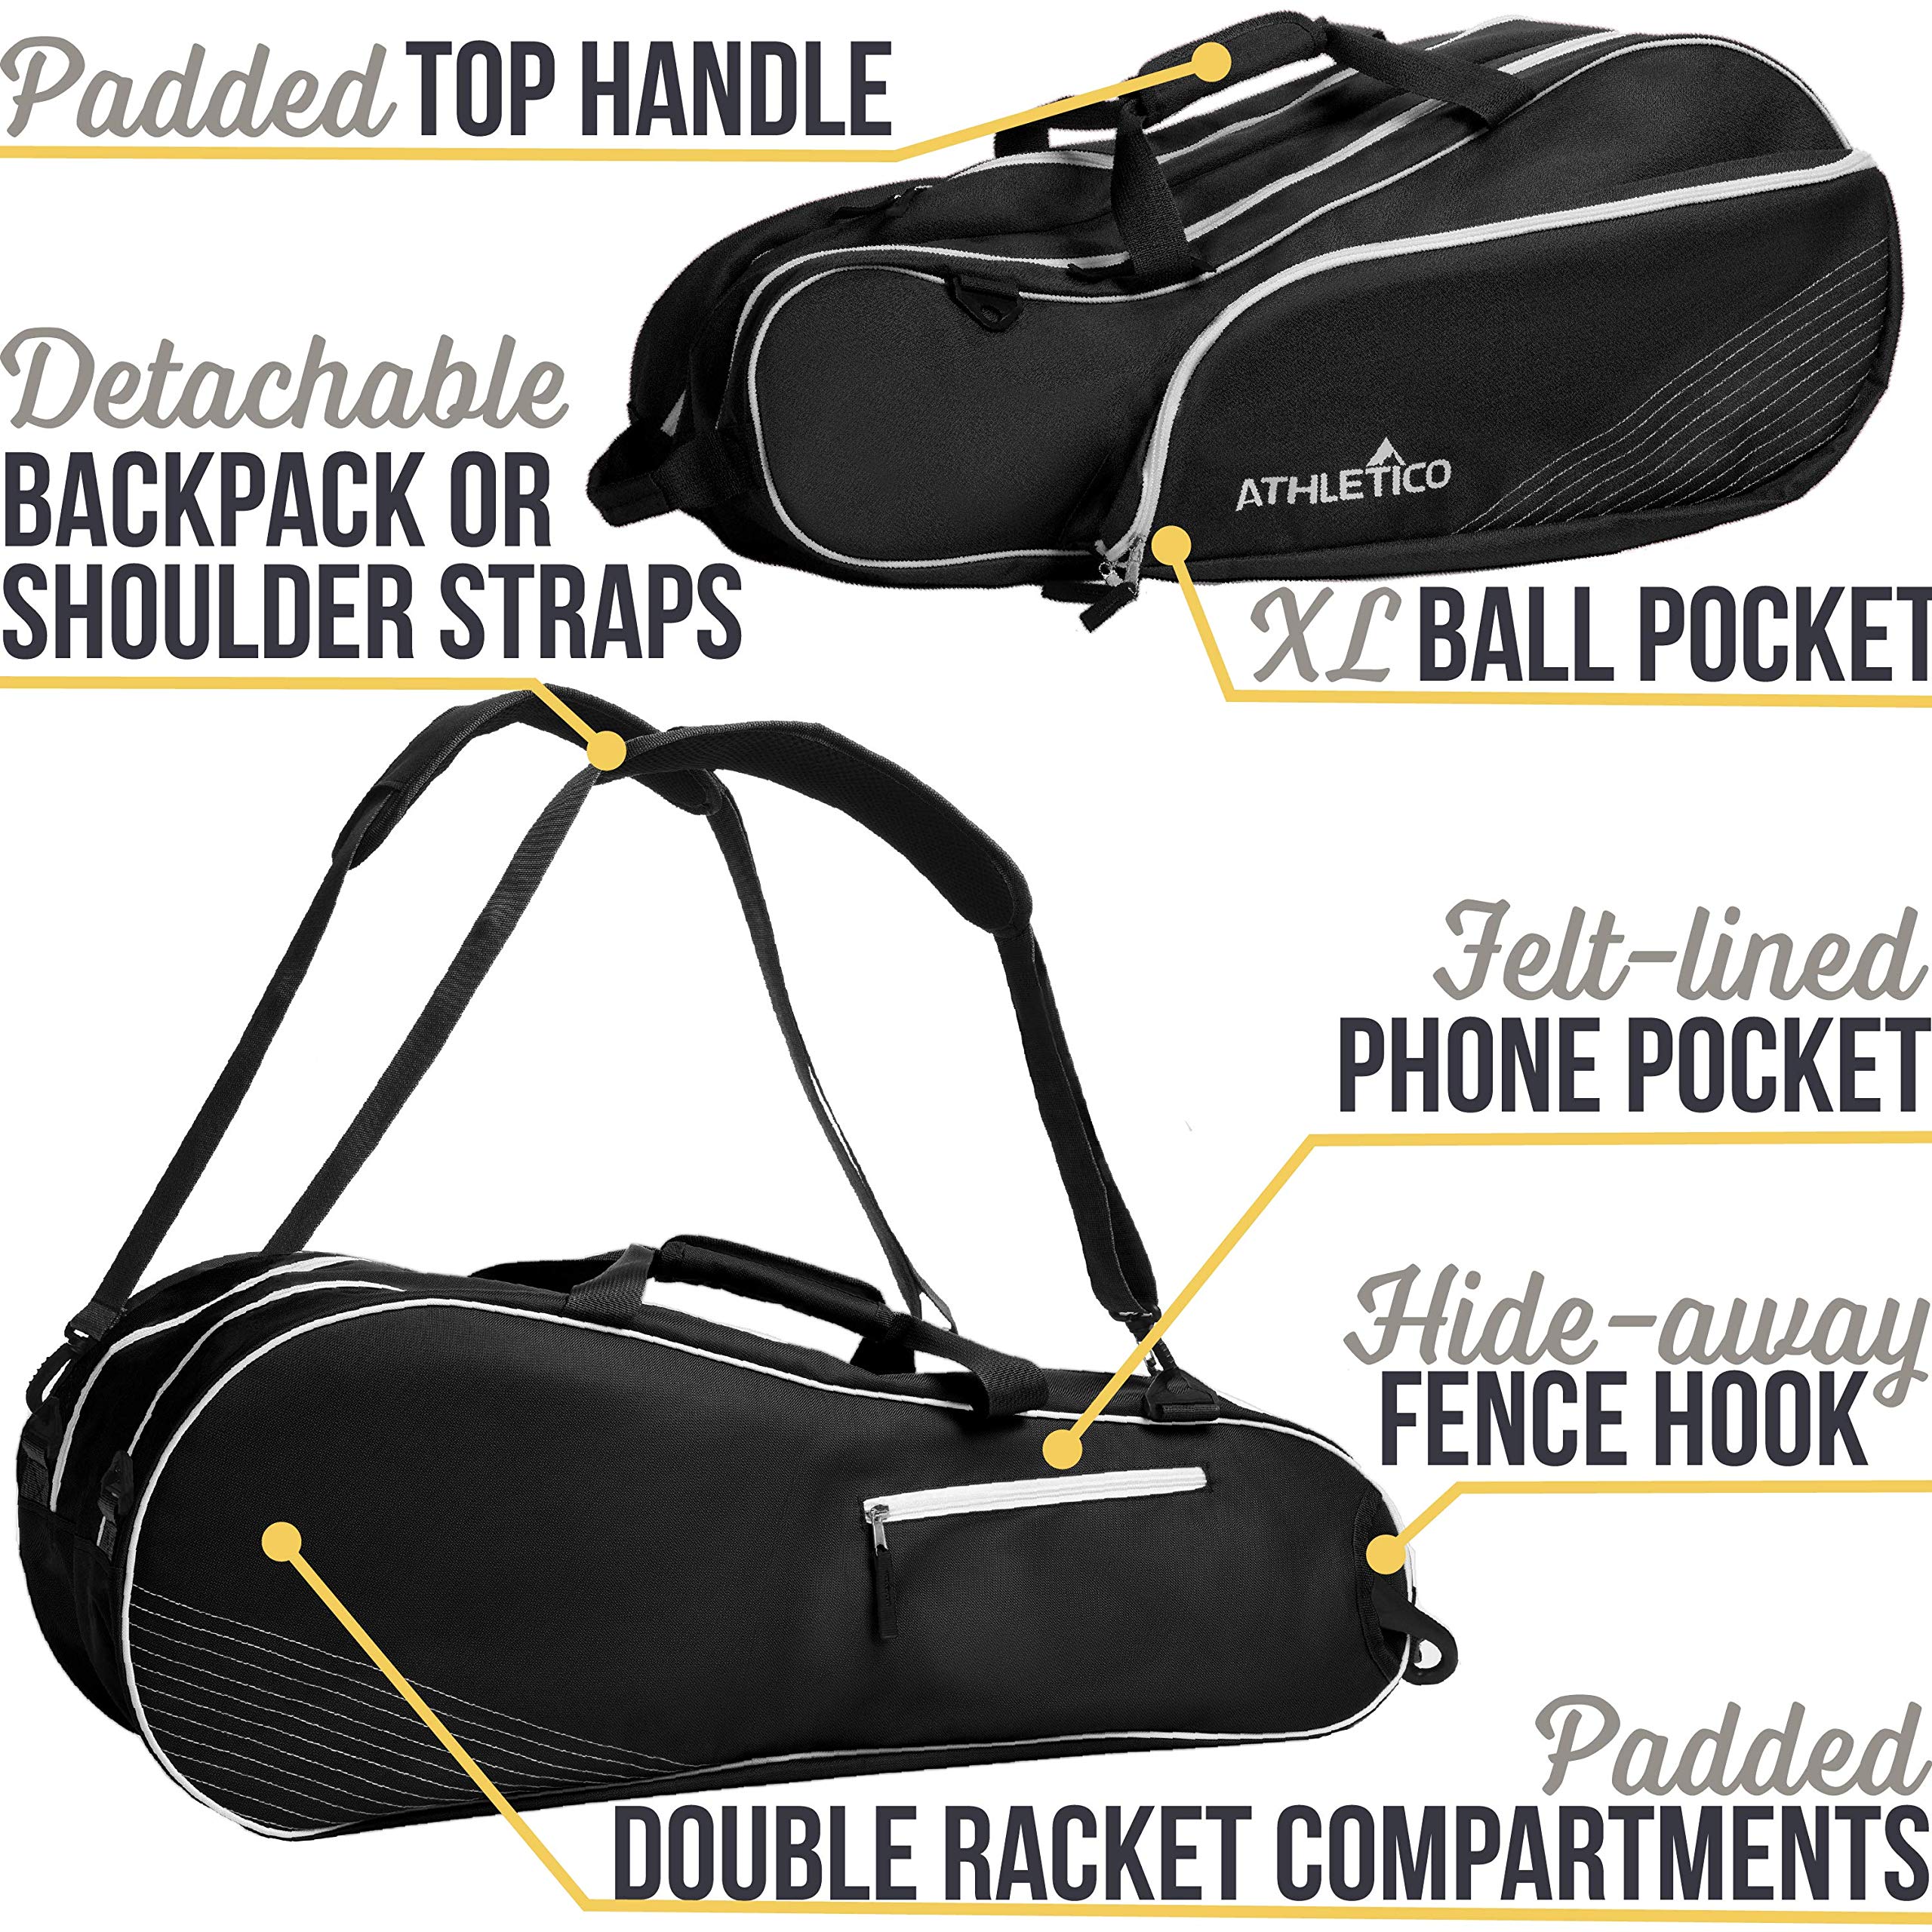 Athletico 6 Racquet Tennis Bag | Padded to Protect Rackets & Lightweight | Professional or Beginner Tennis Players | Unisex Design for Men, Women, Youth and Adults  - Like New